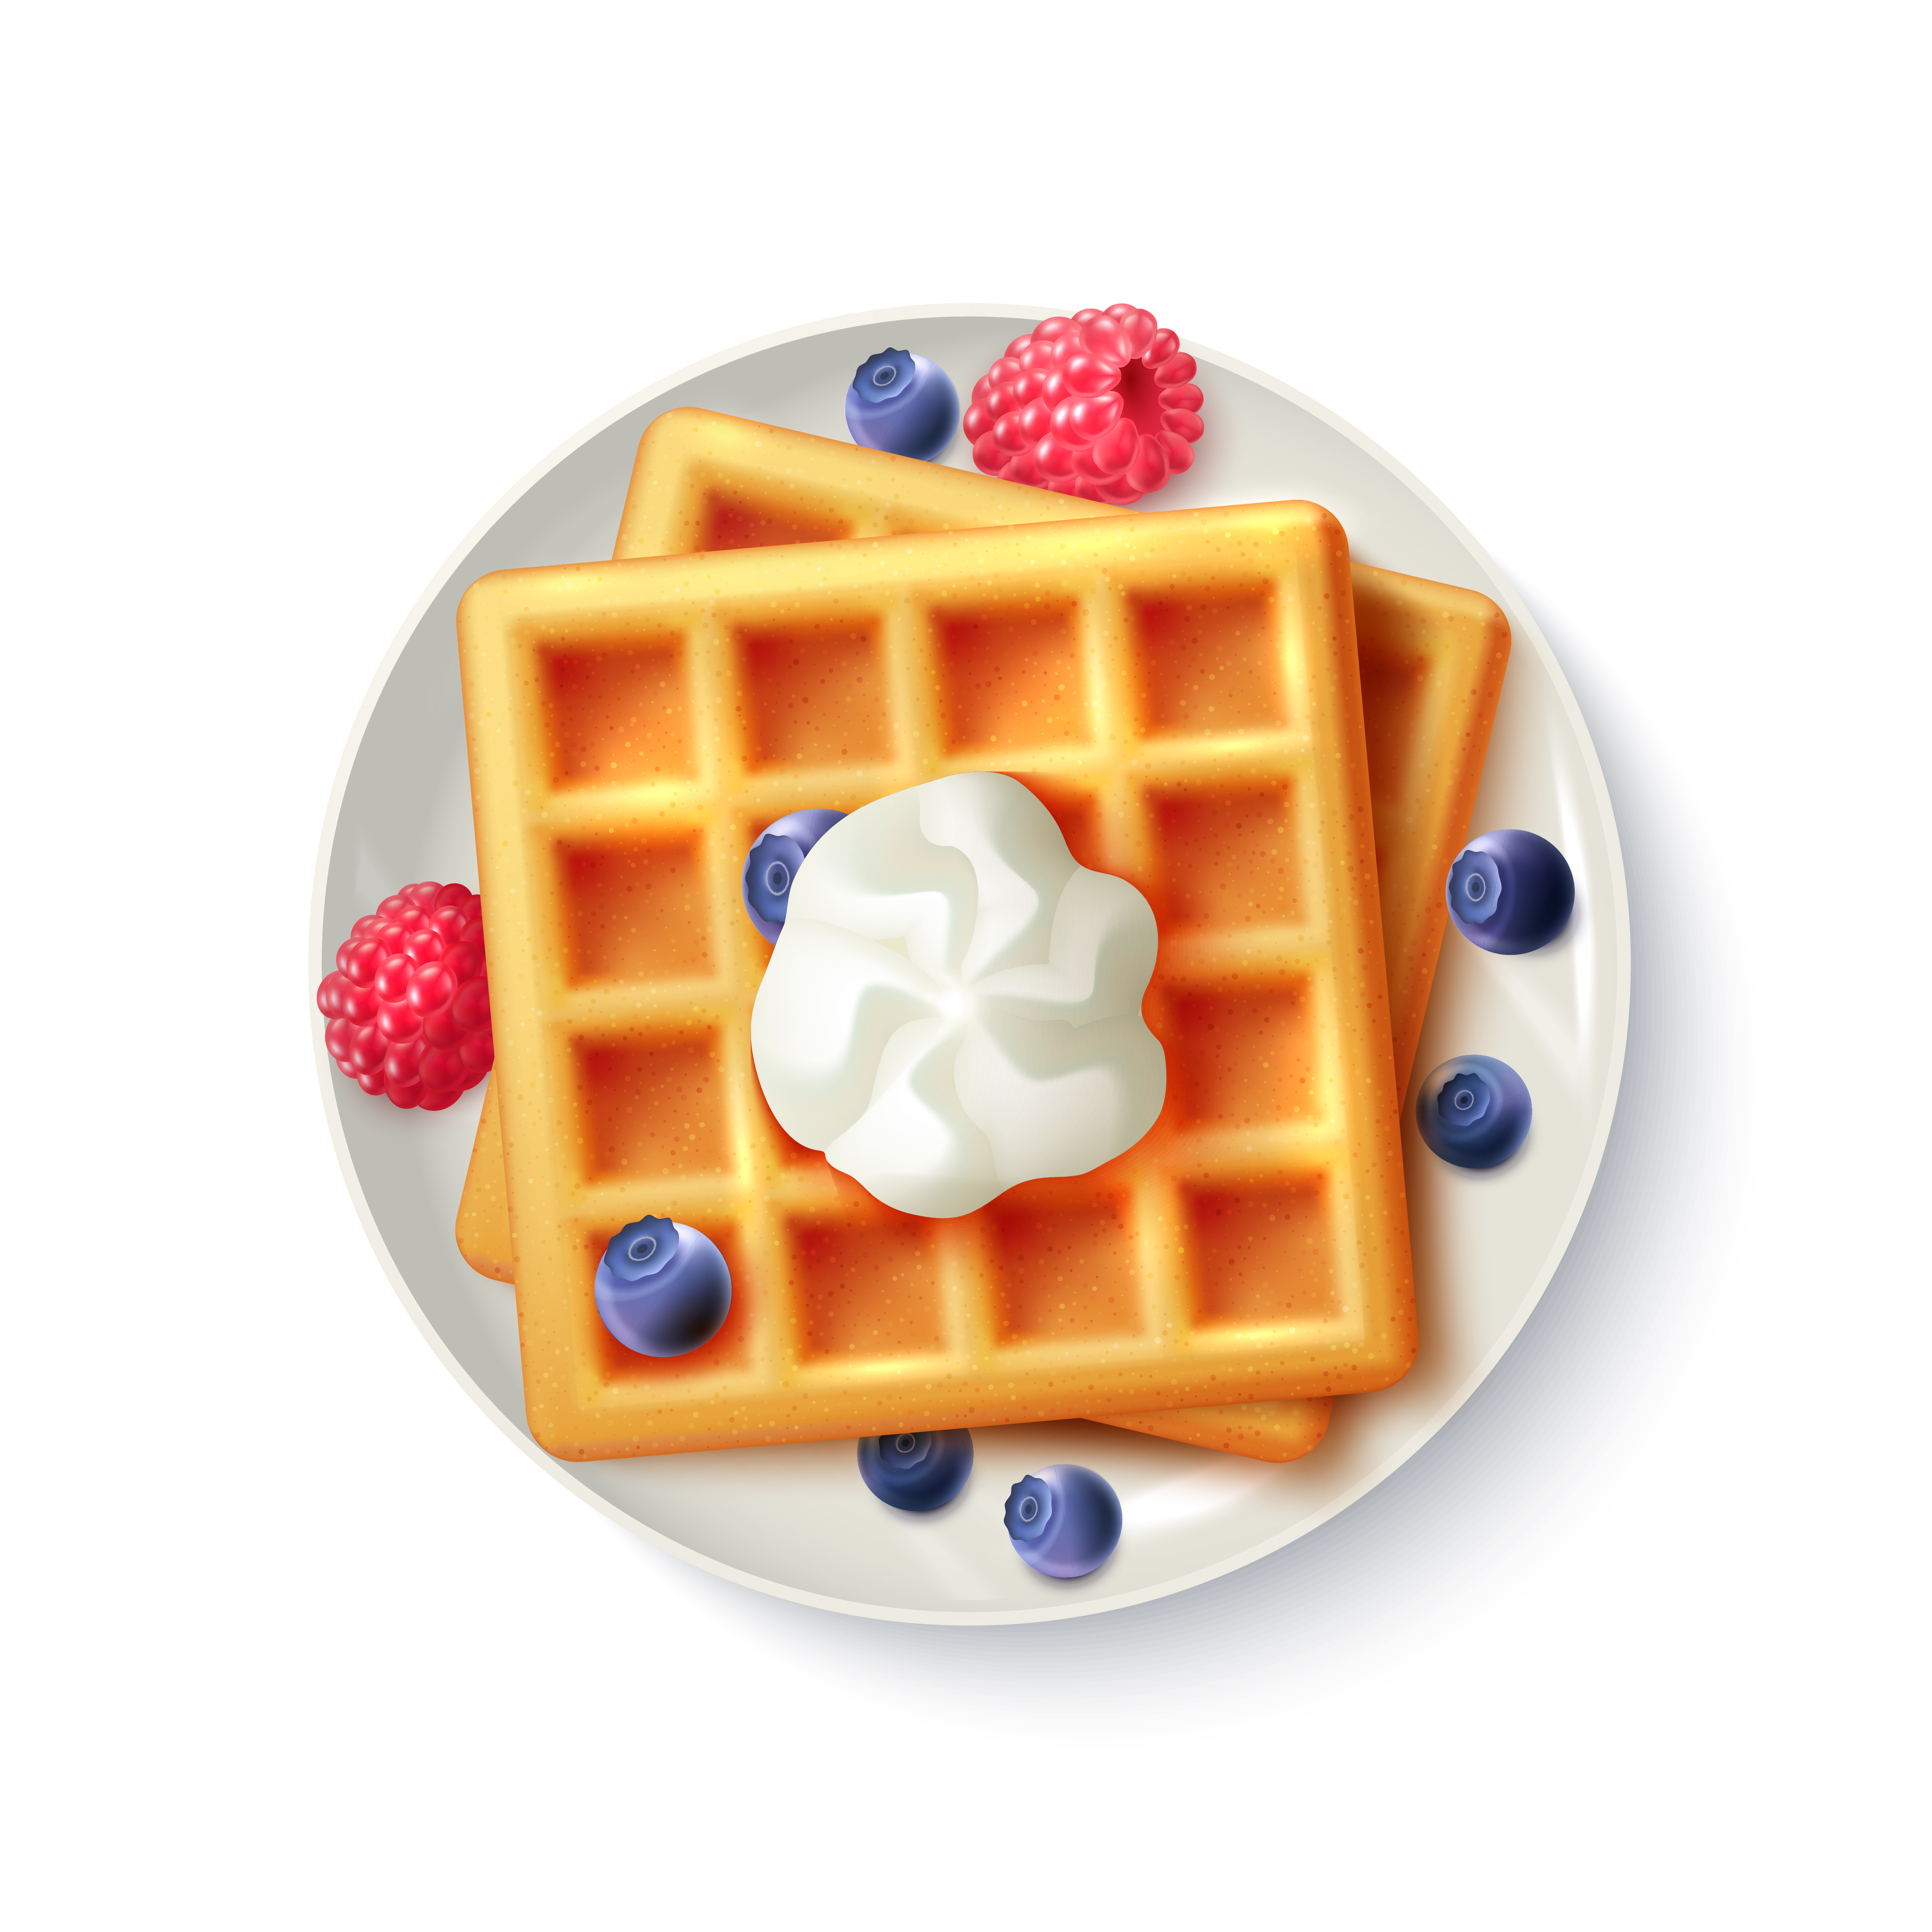 Breakfast Waffles Realistic Top View Image